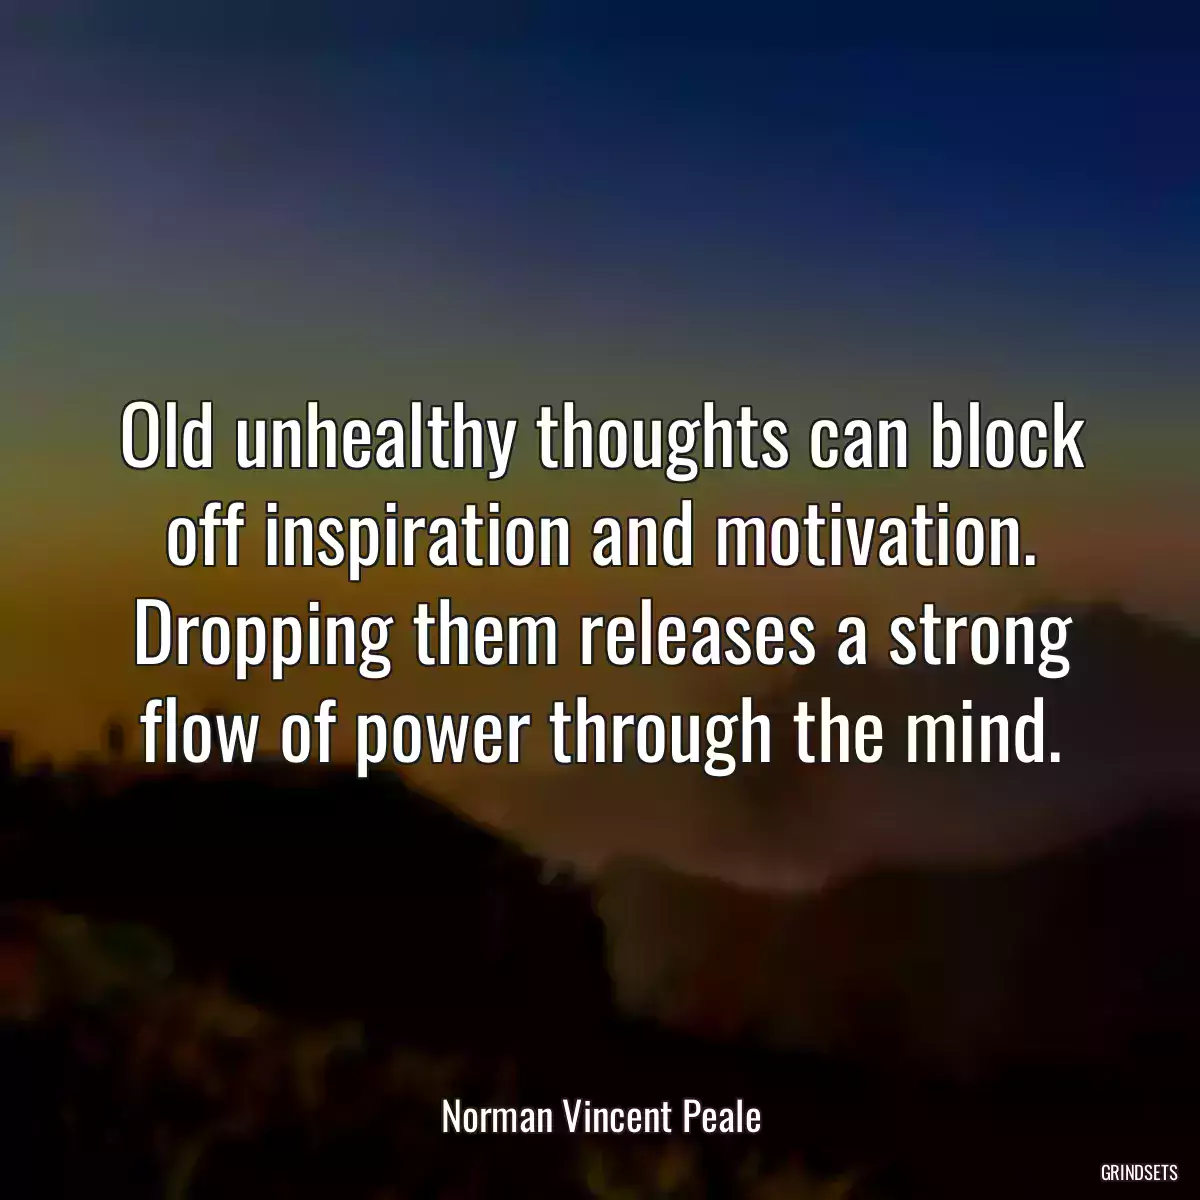 Old unhealthy thoughts can block off inspiration and motivation. Dropping them releases a strong flow of power through the mind.